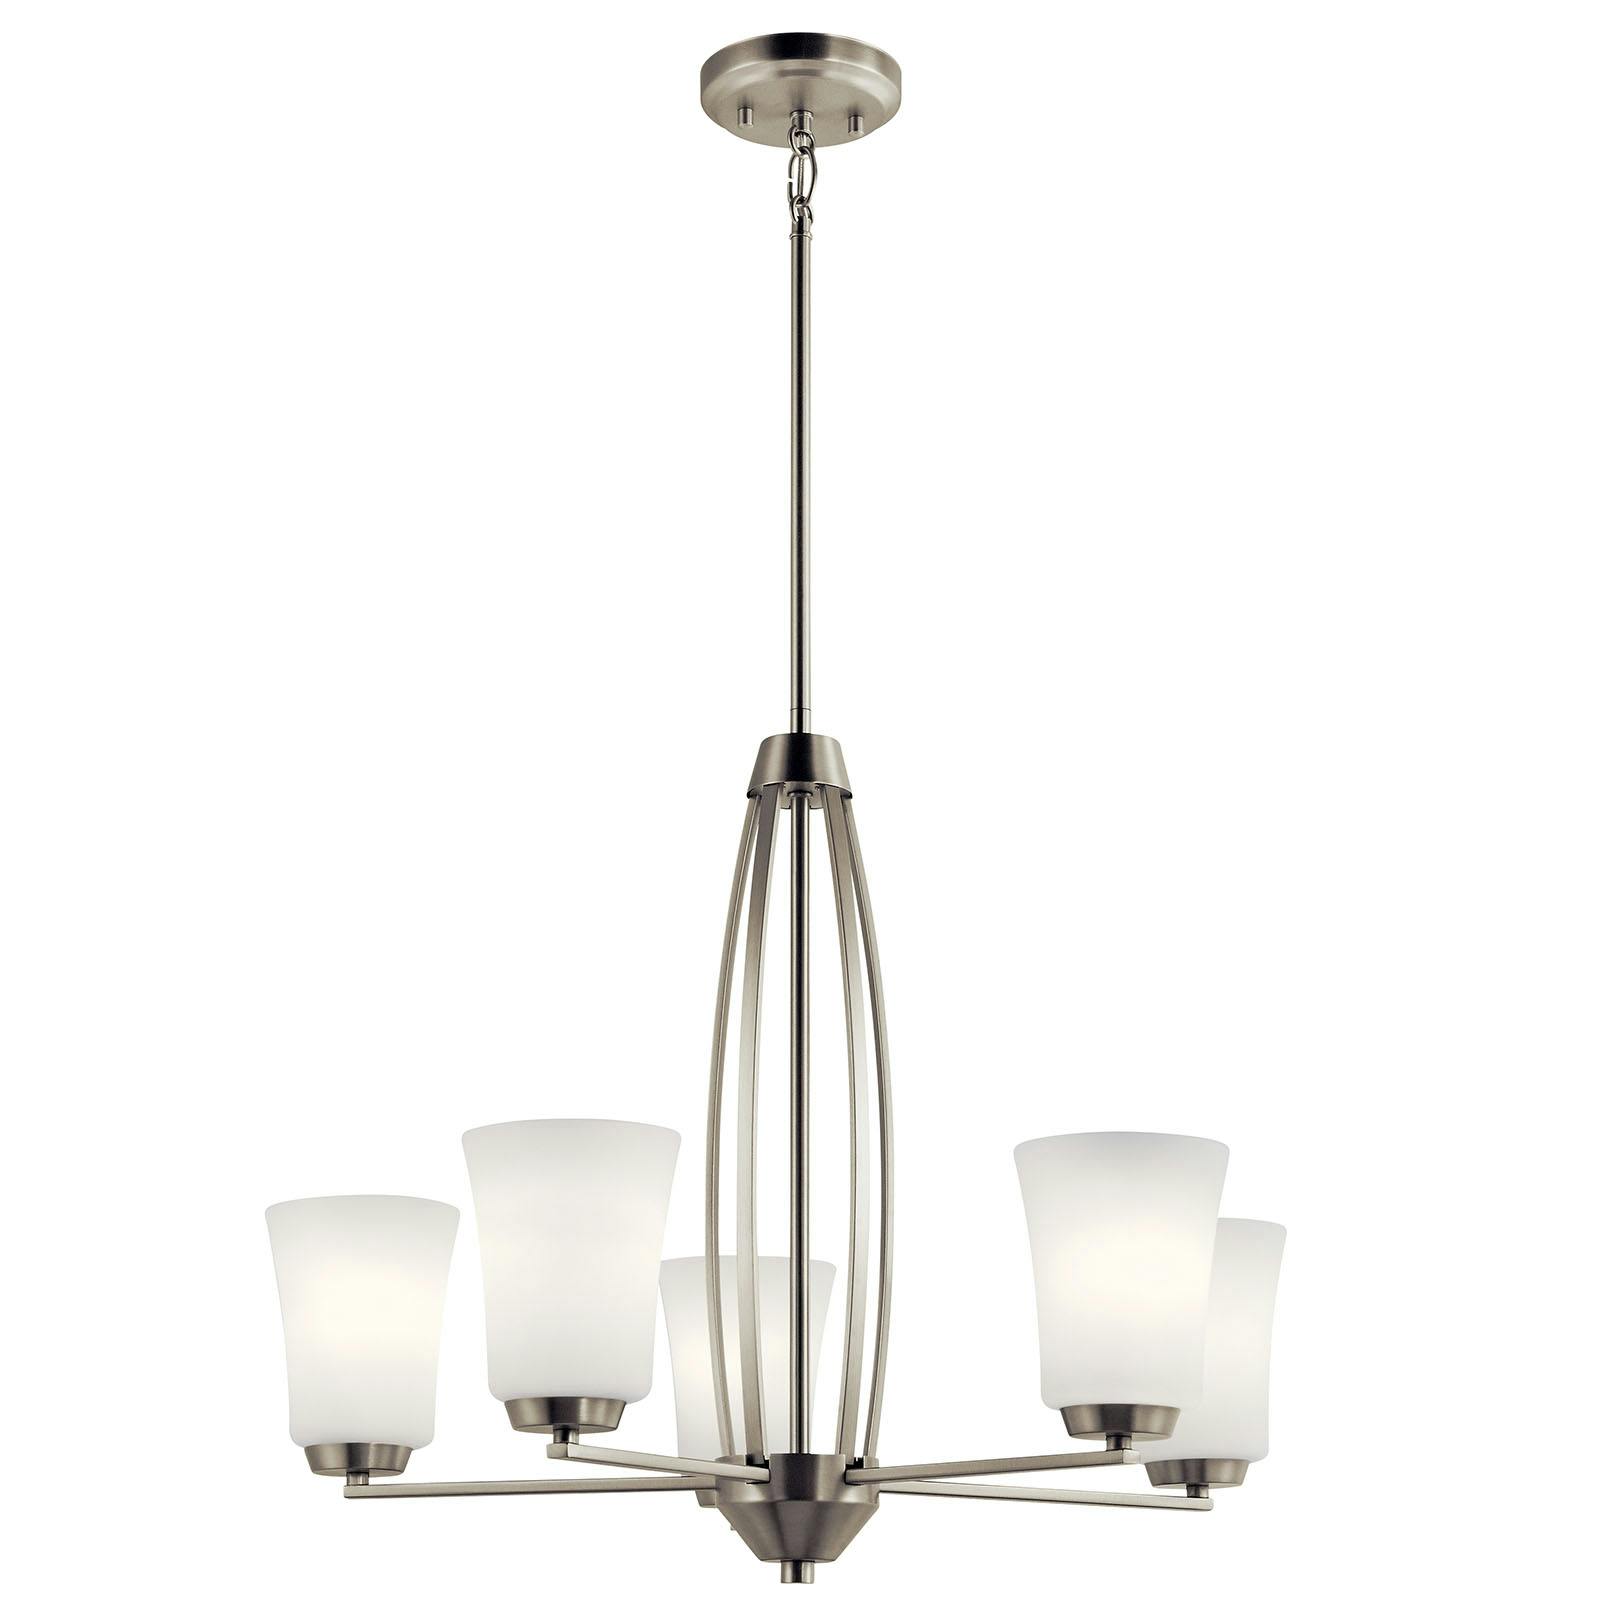 Tao 5 Light Chandelier Brushed Nickel on a white background